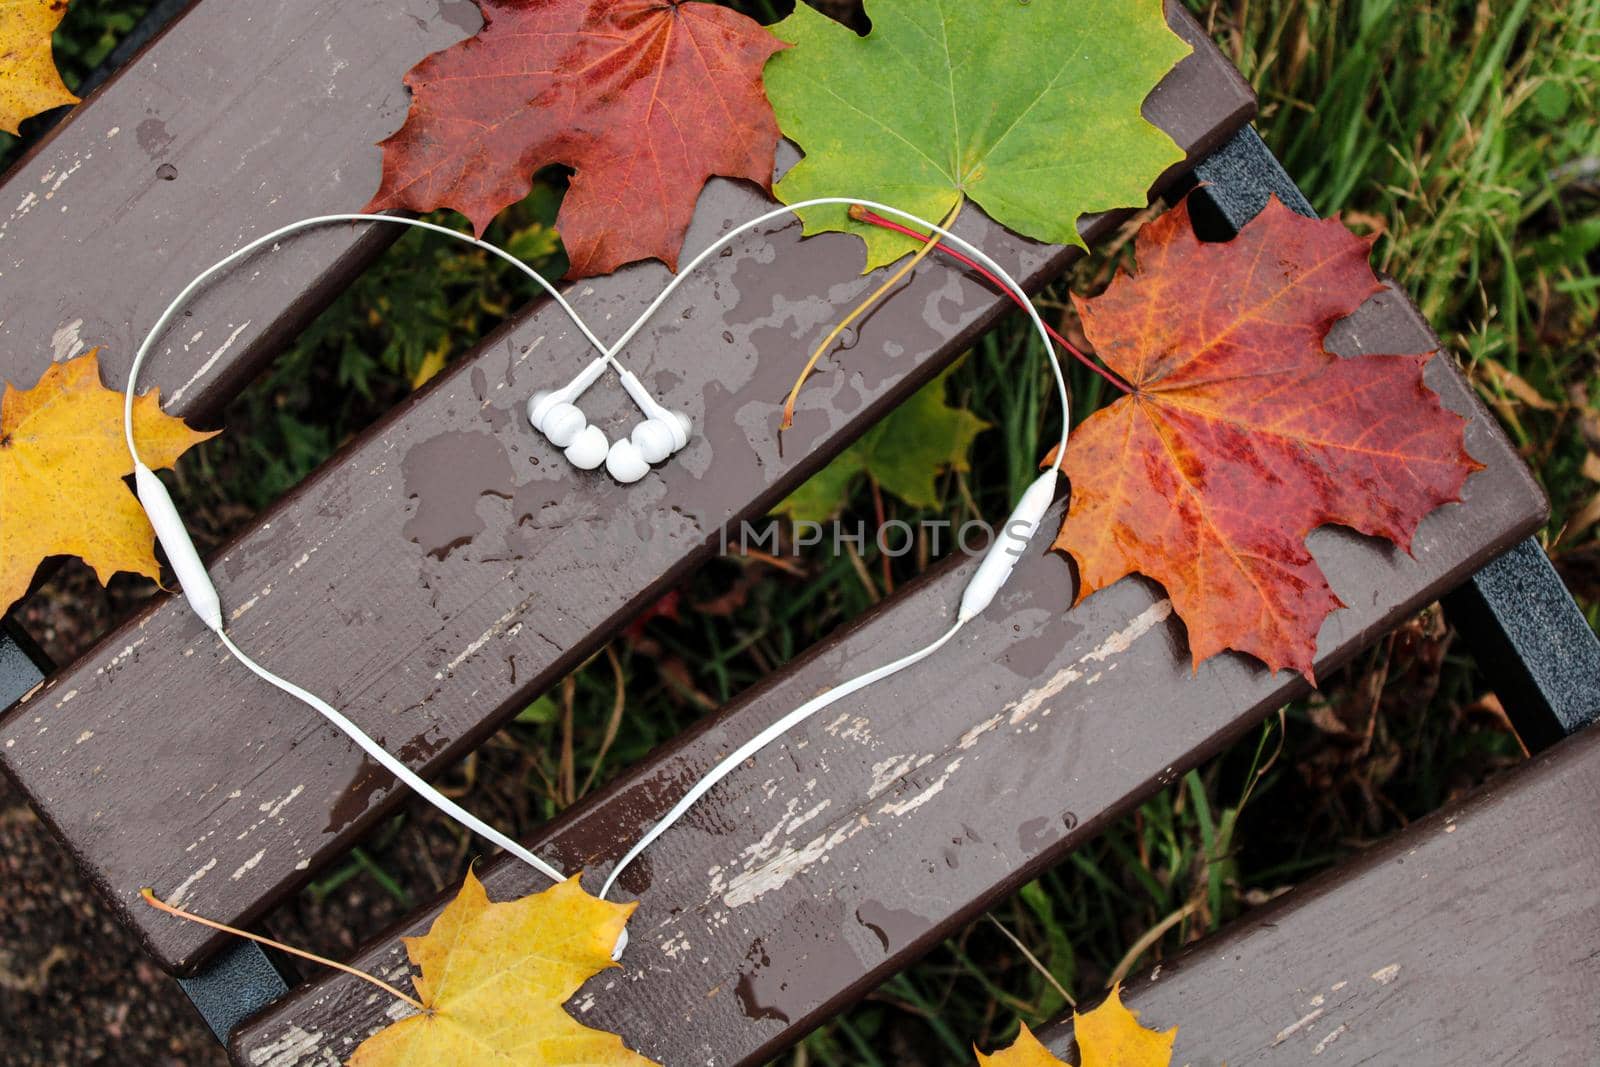 White heart-shaped headphones lie on a bench with maple leaves in an autumn park.